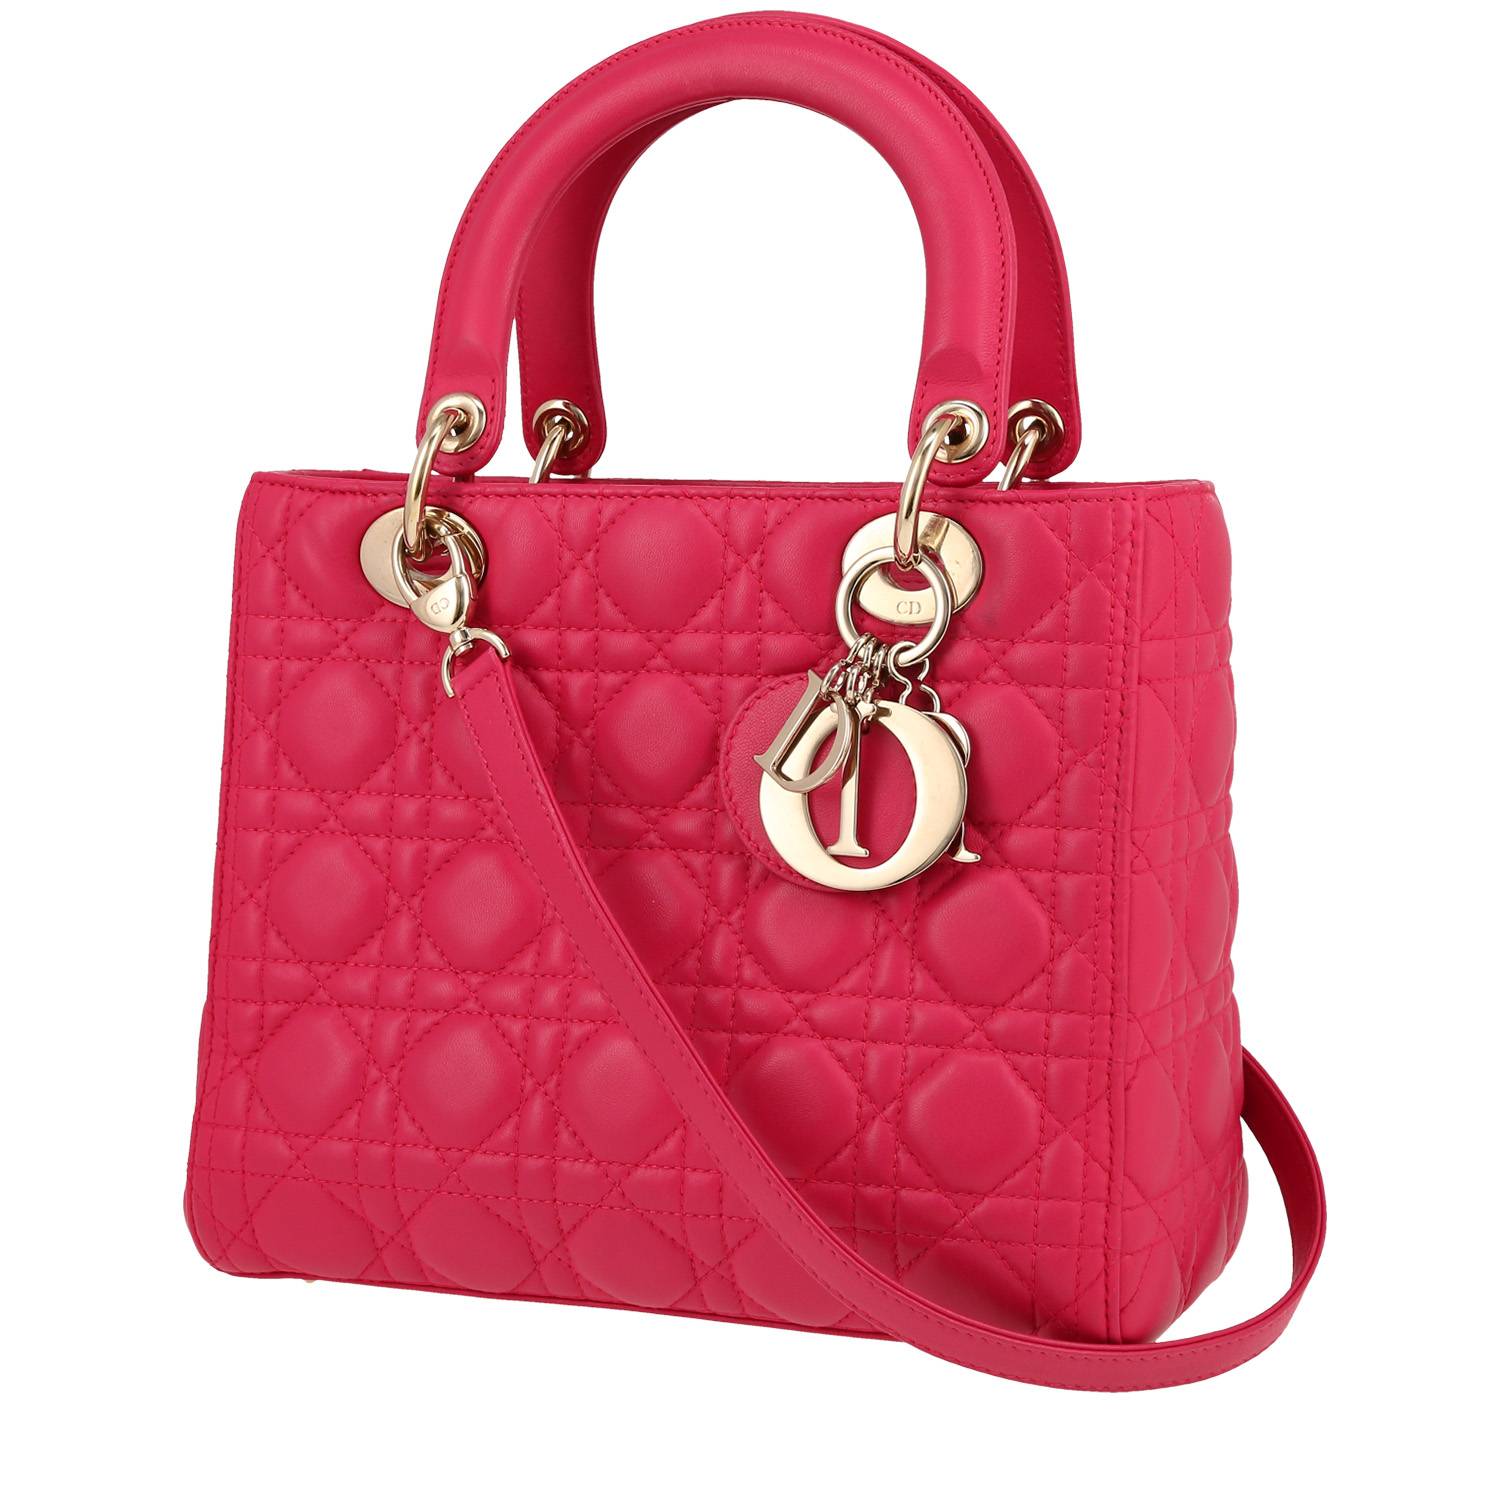 Lady dior leather handbag Dior Pink in Leather - 38221215